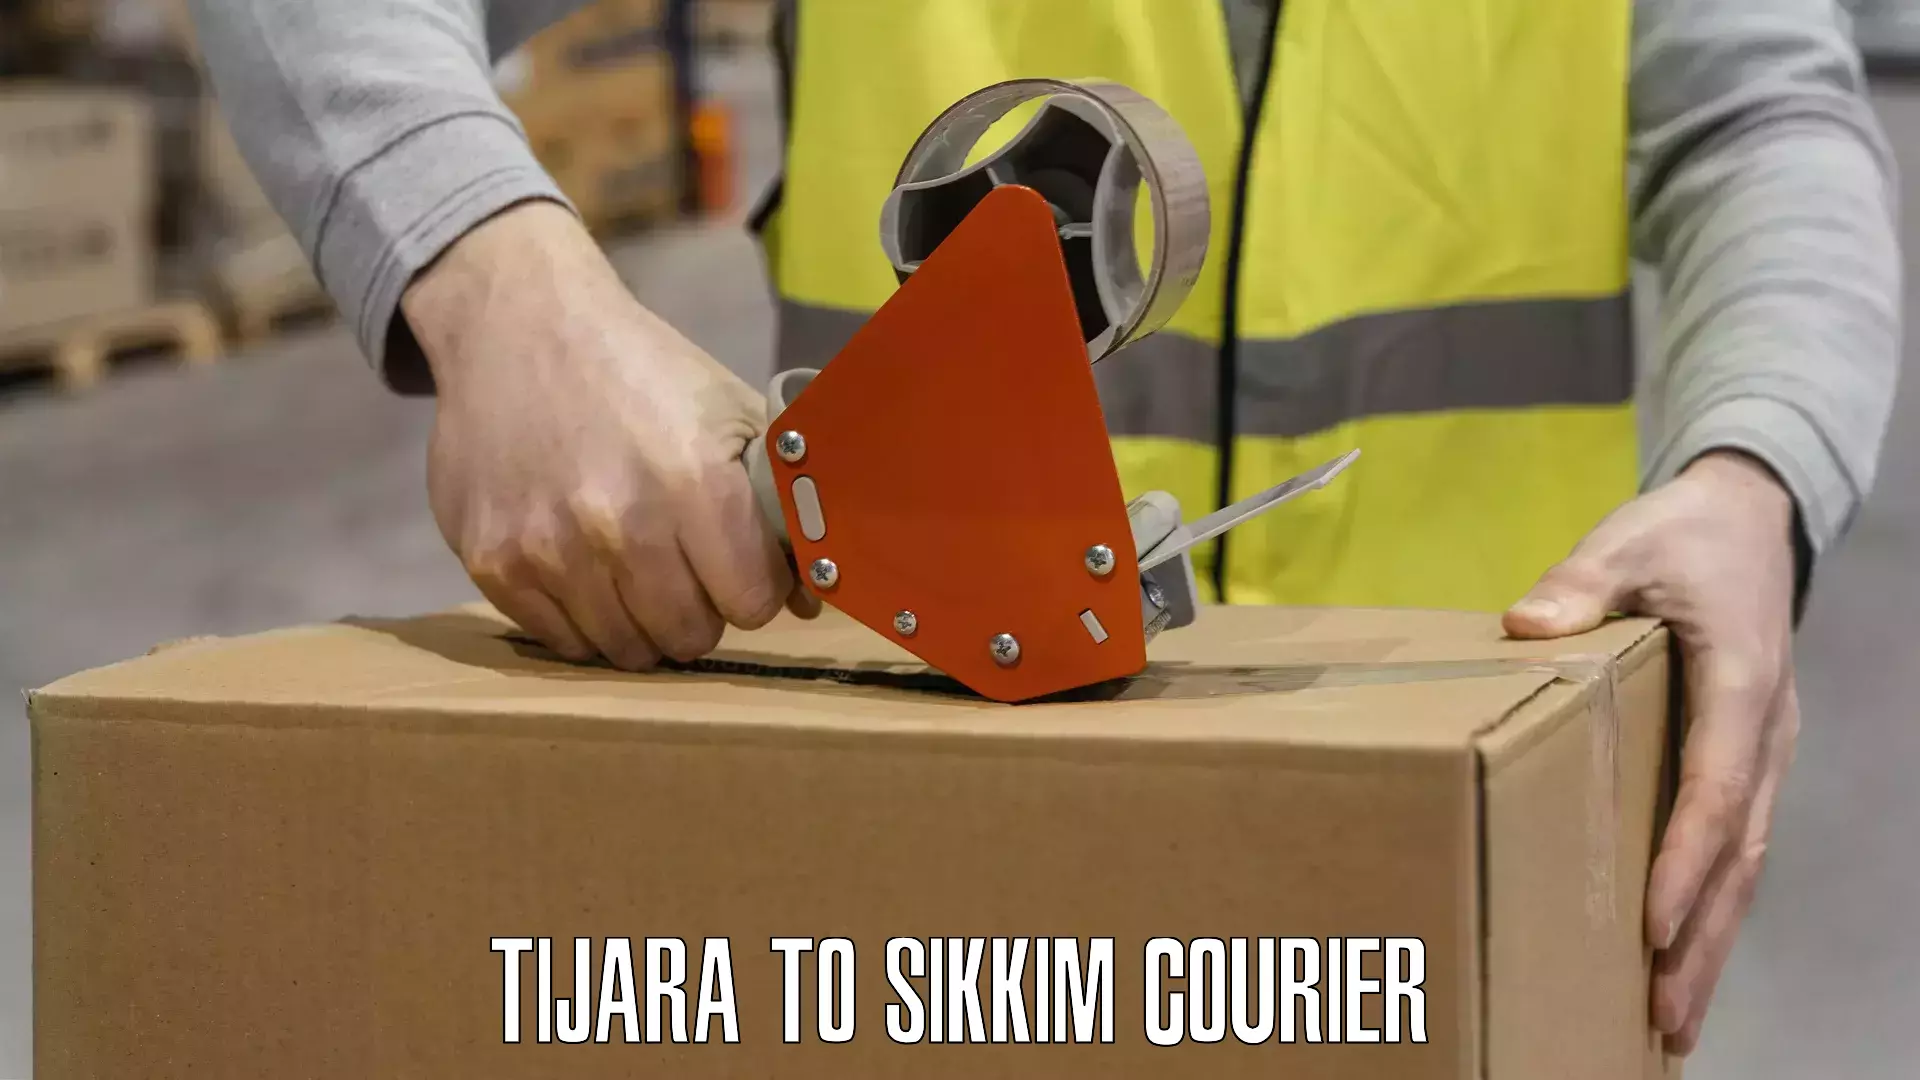 Full-service courier options Tijara to Sikkim